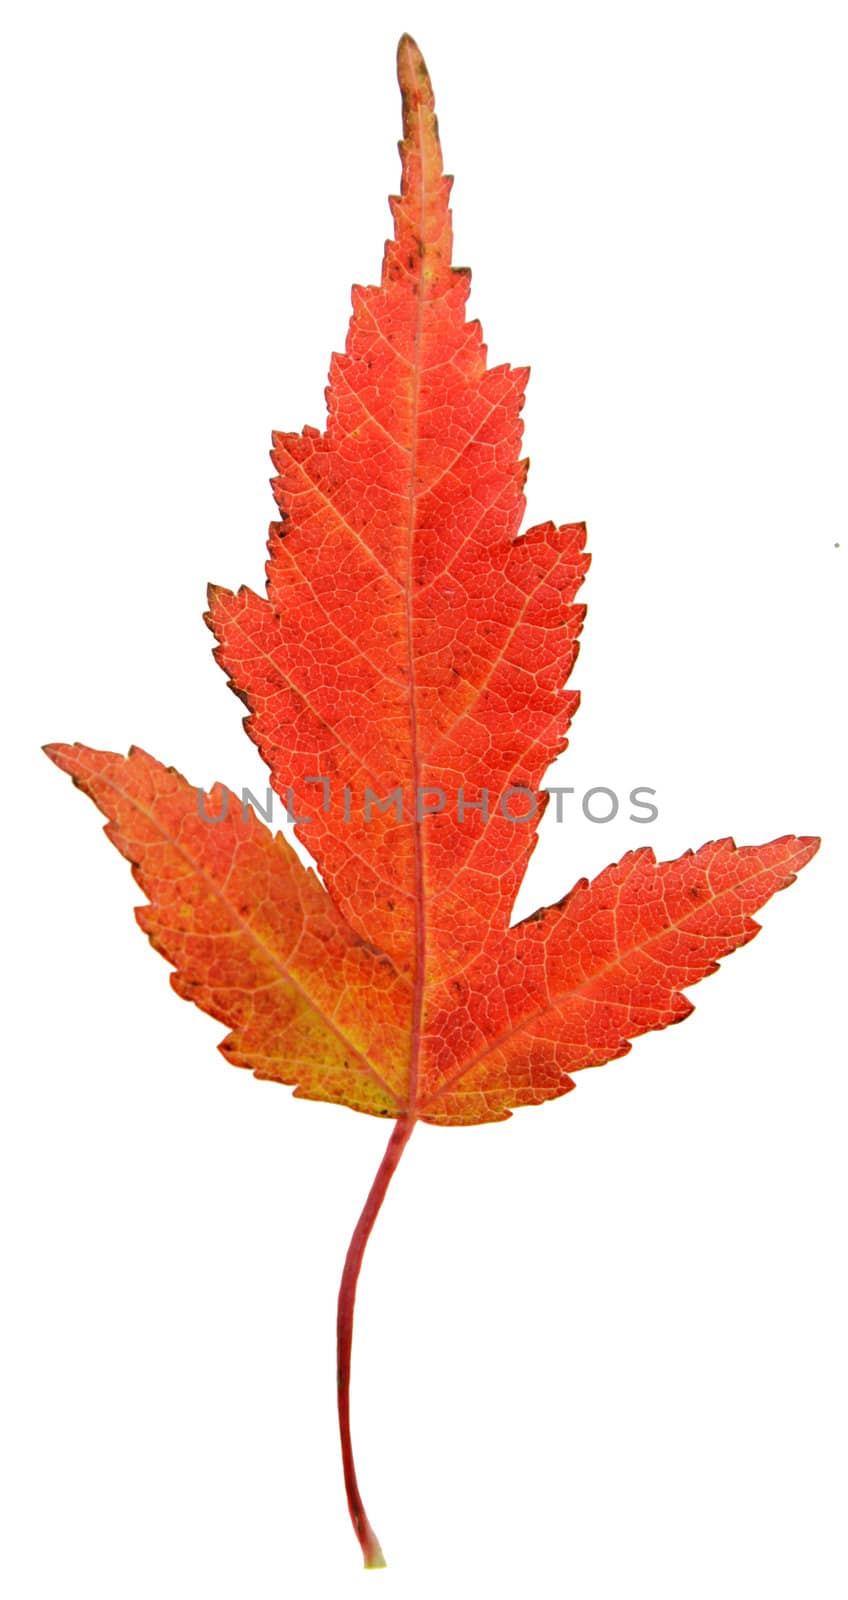 Strange Red Maple Leaf
 by ca2hill